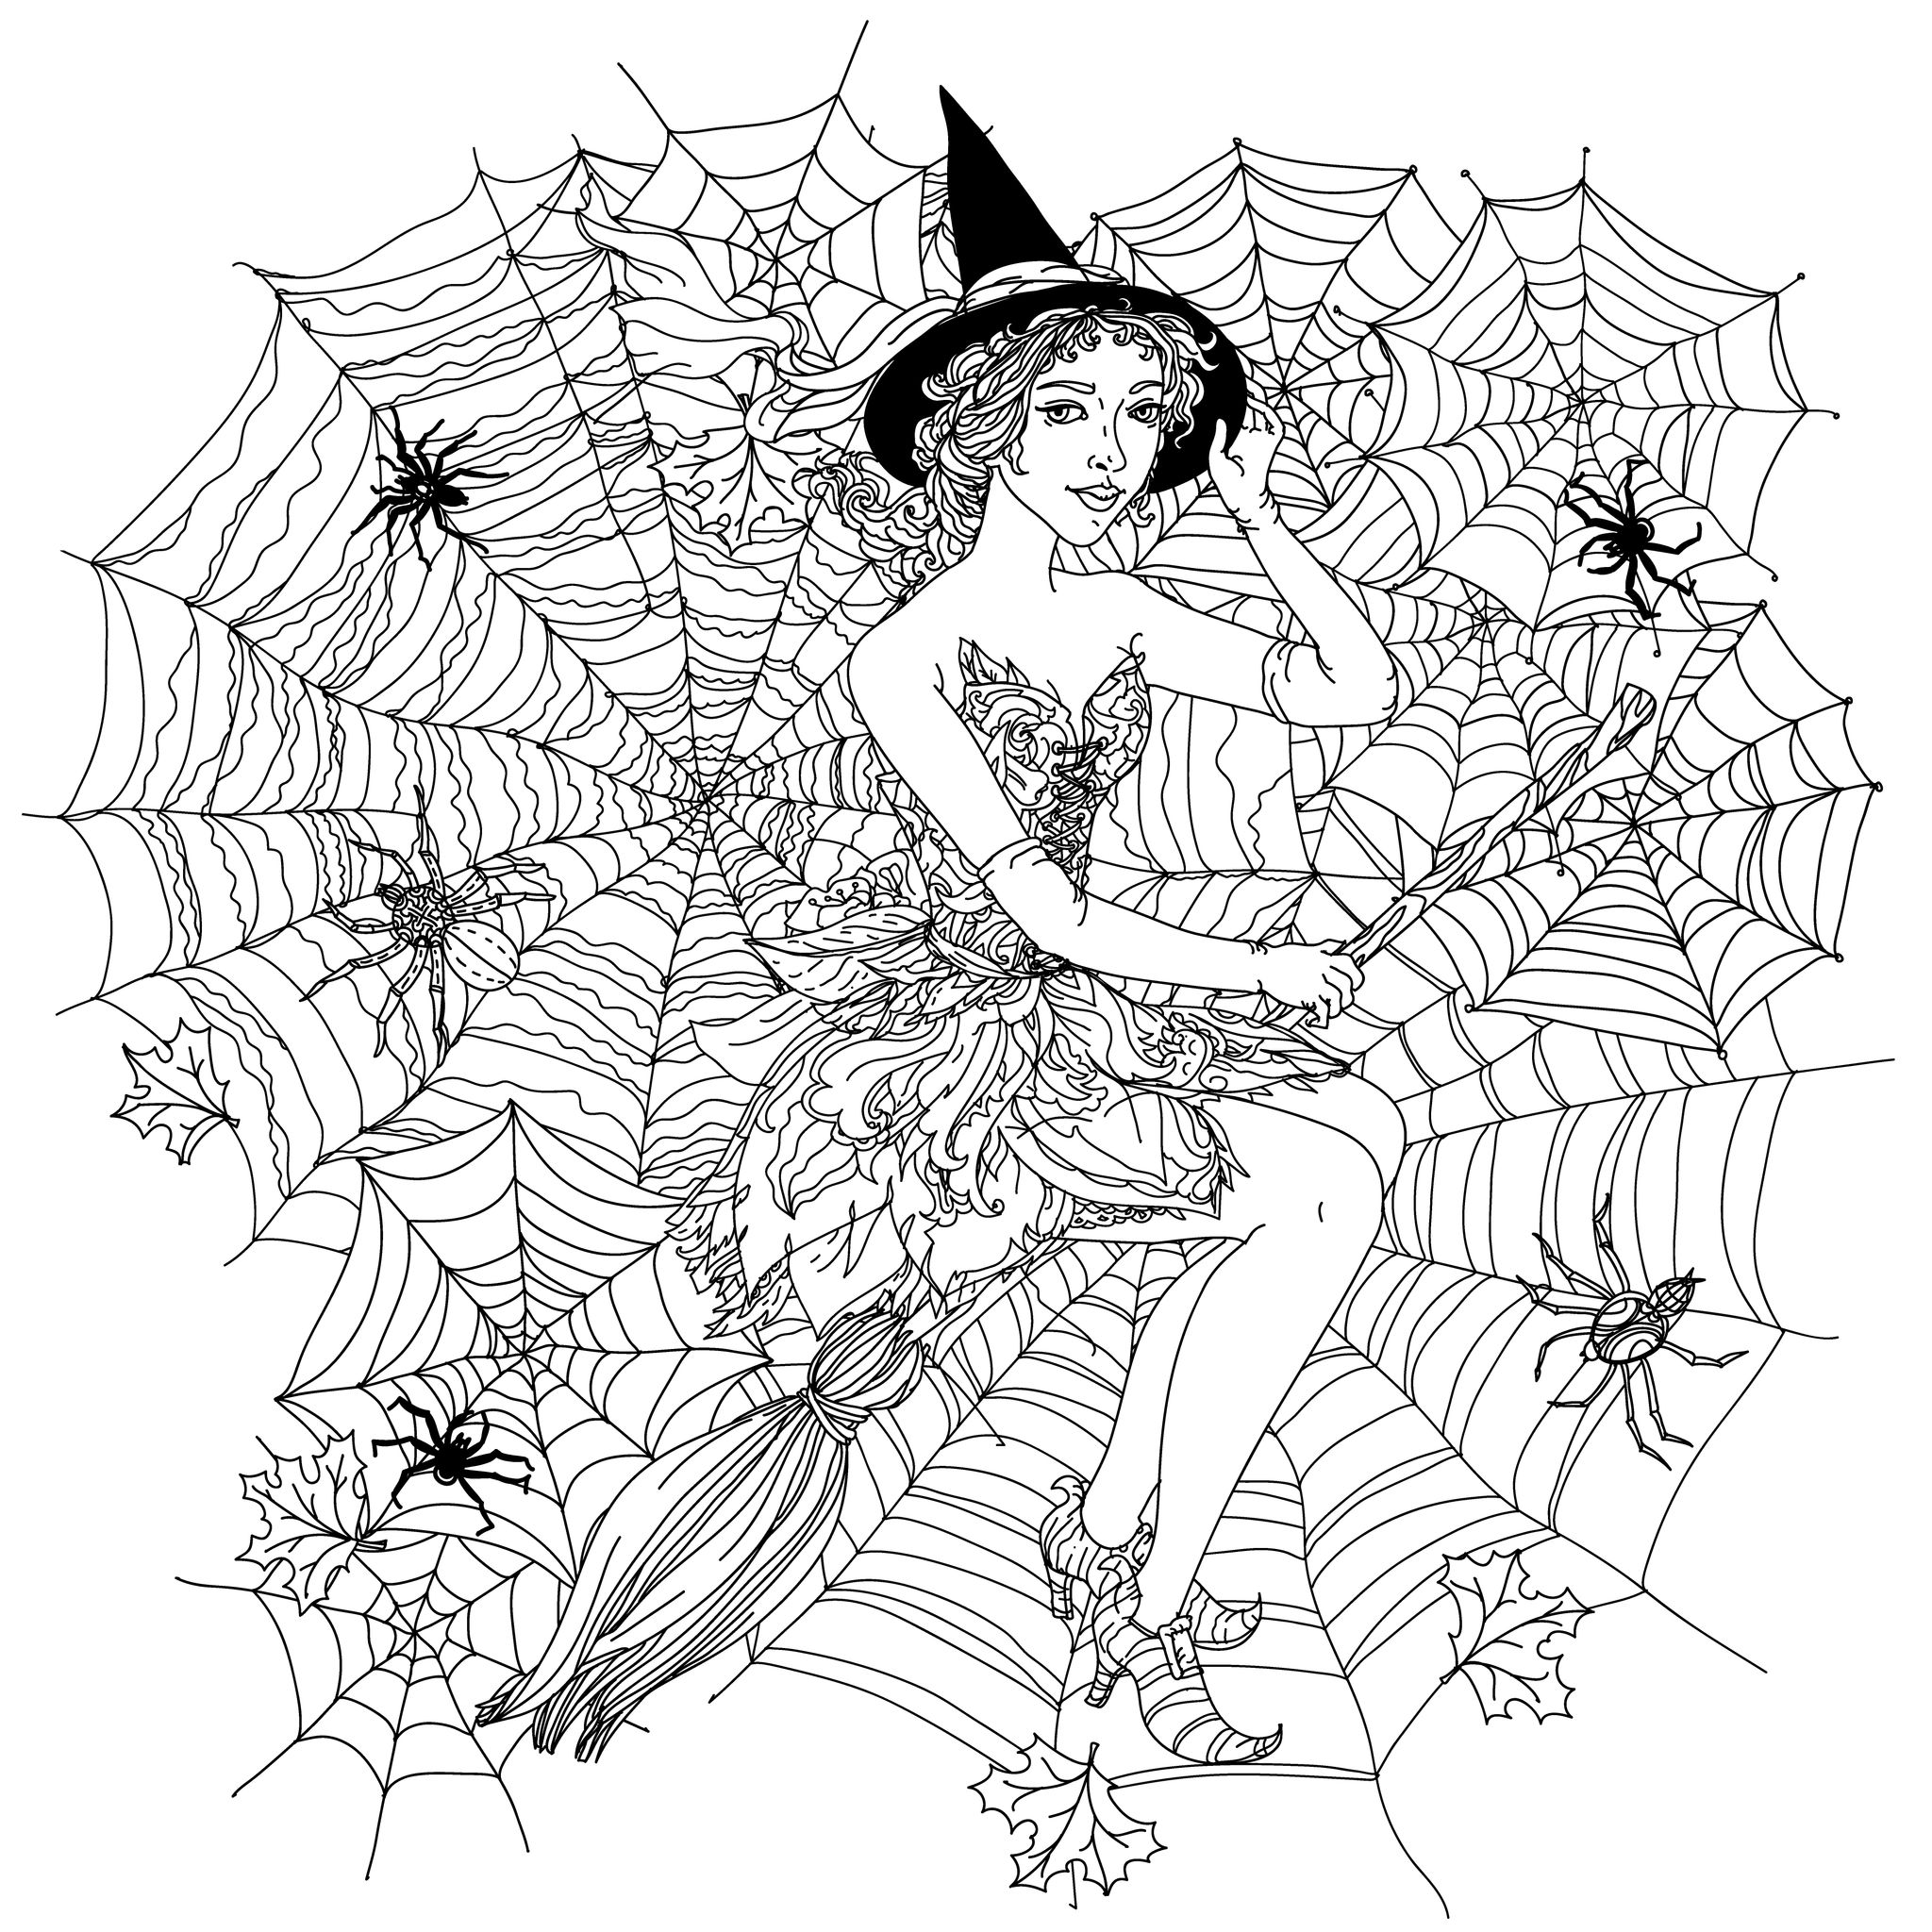 Coloring halloween witch in spider web by mashabr